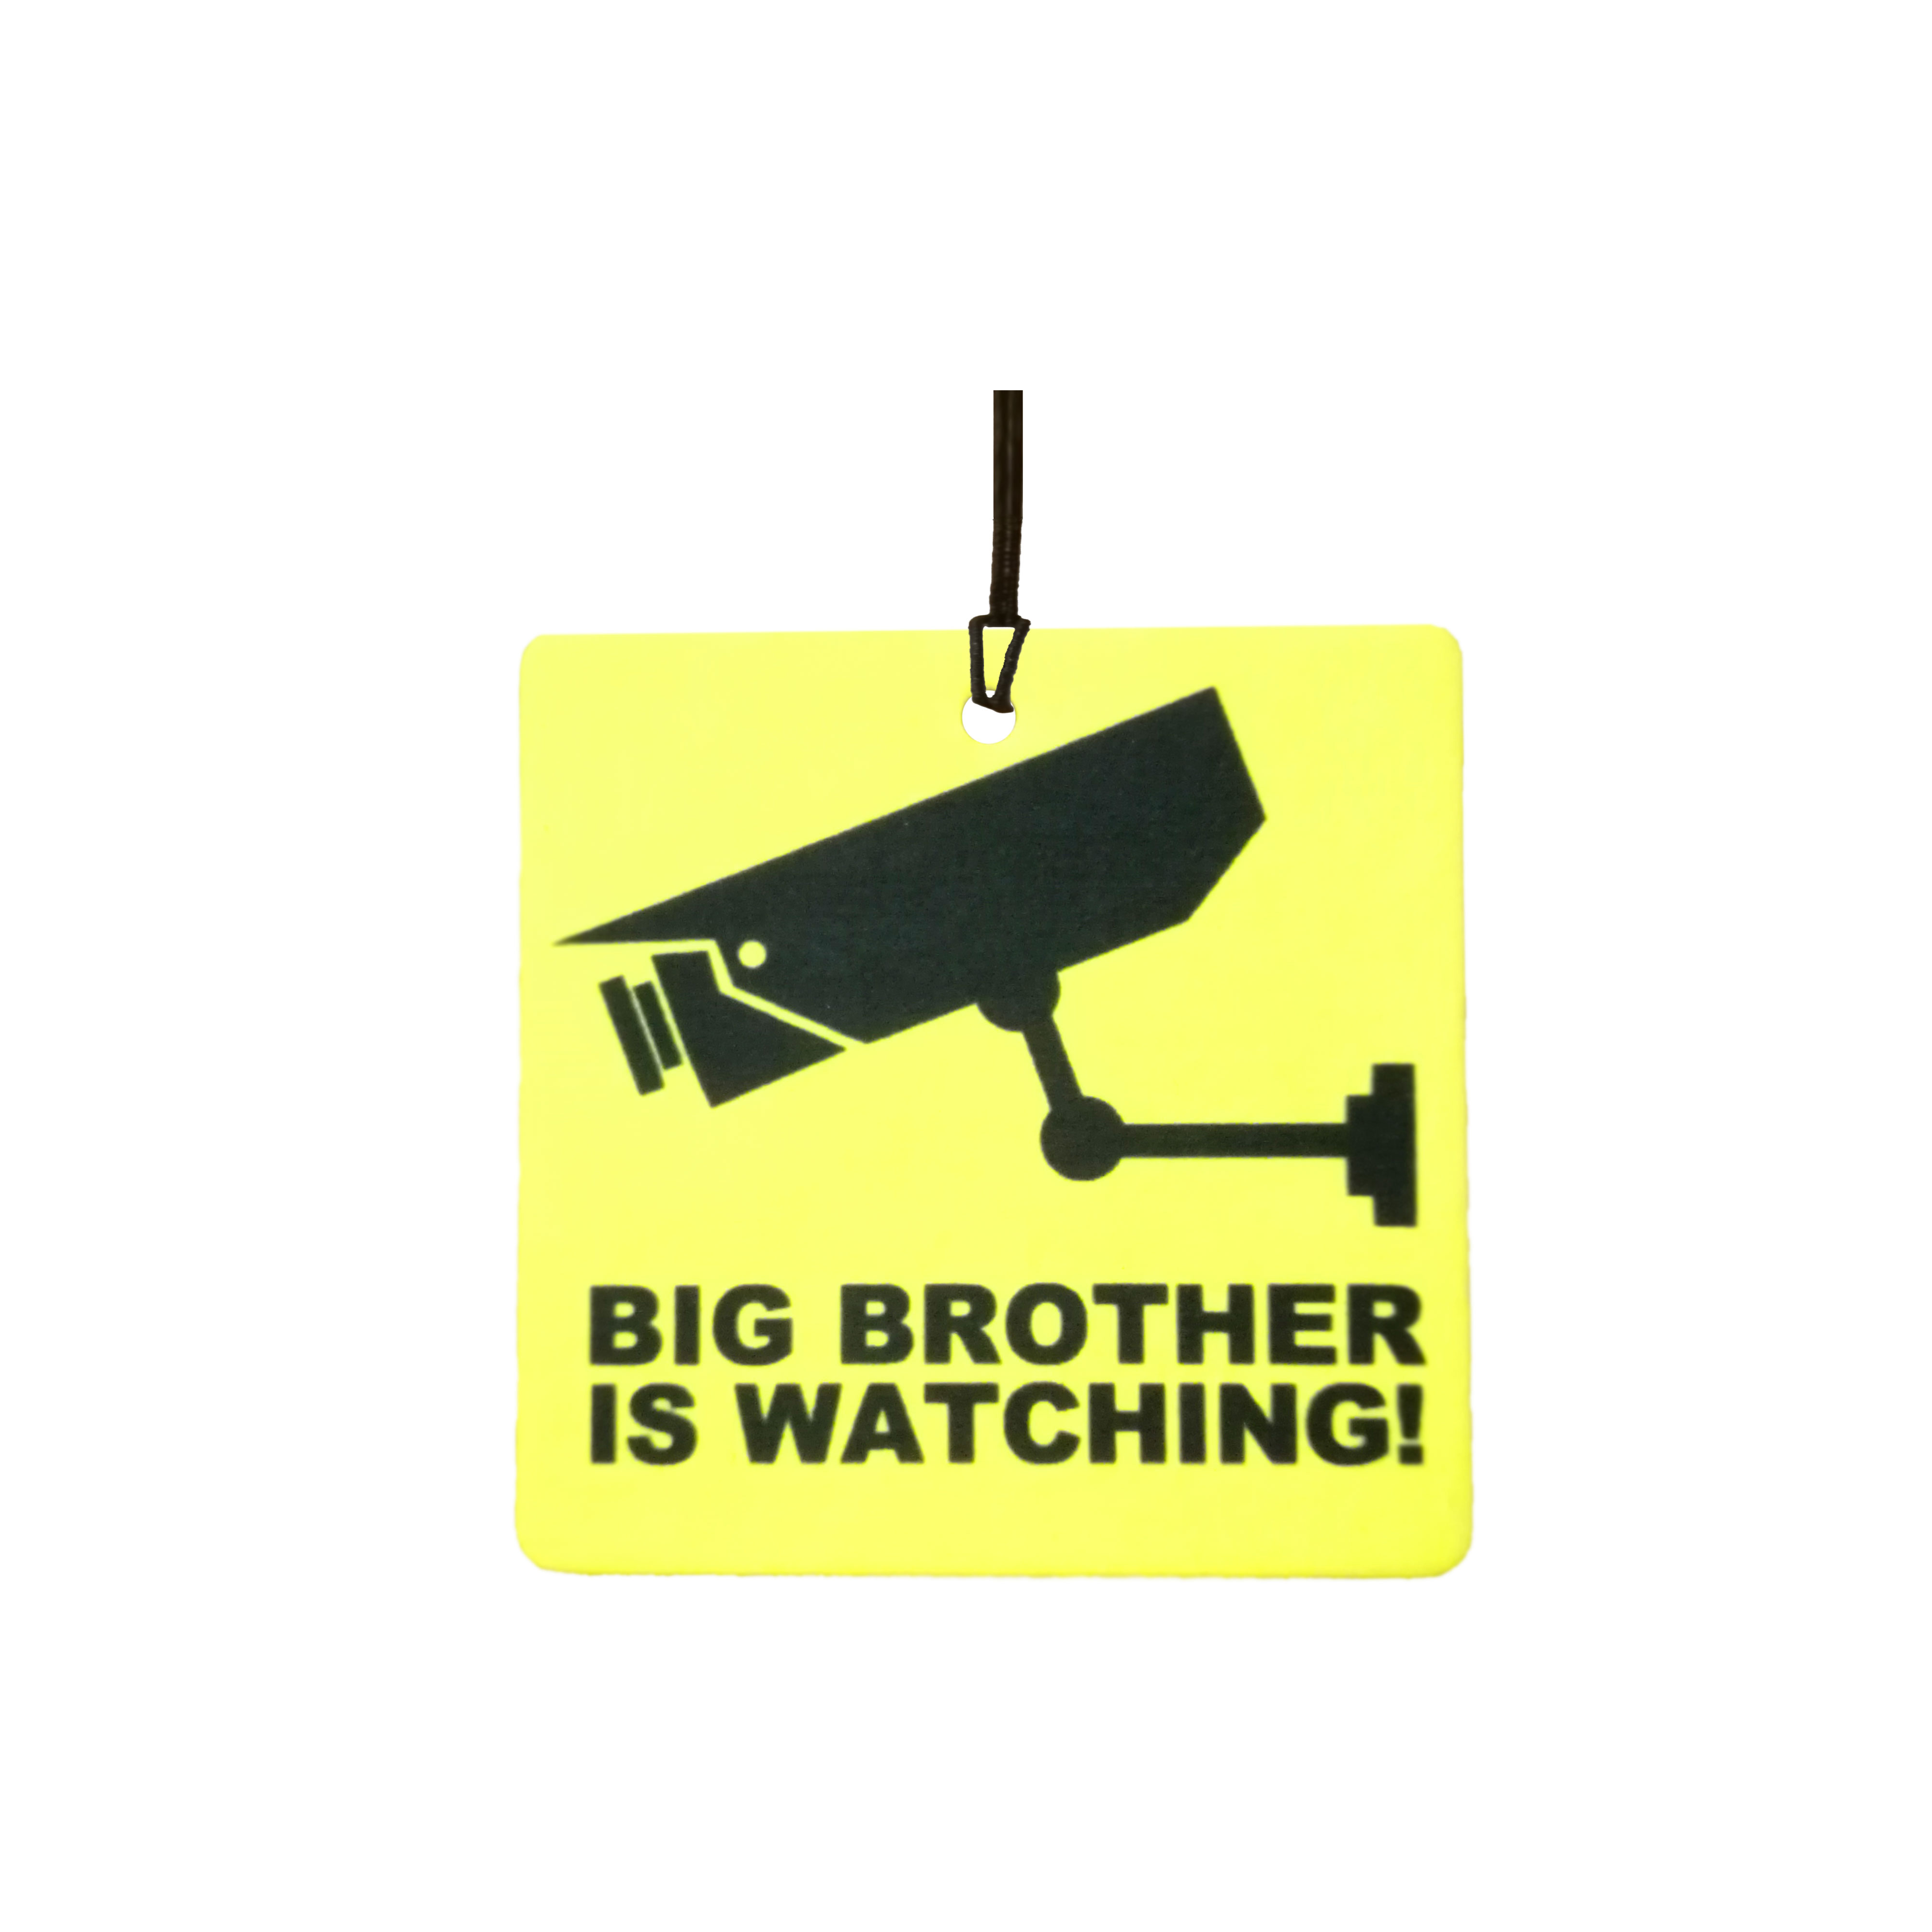 Big Brother Is Watching!